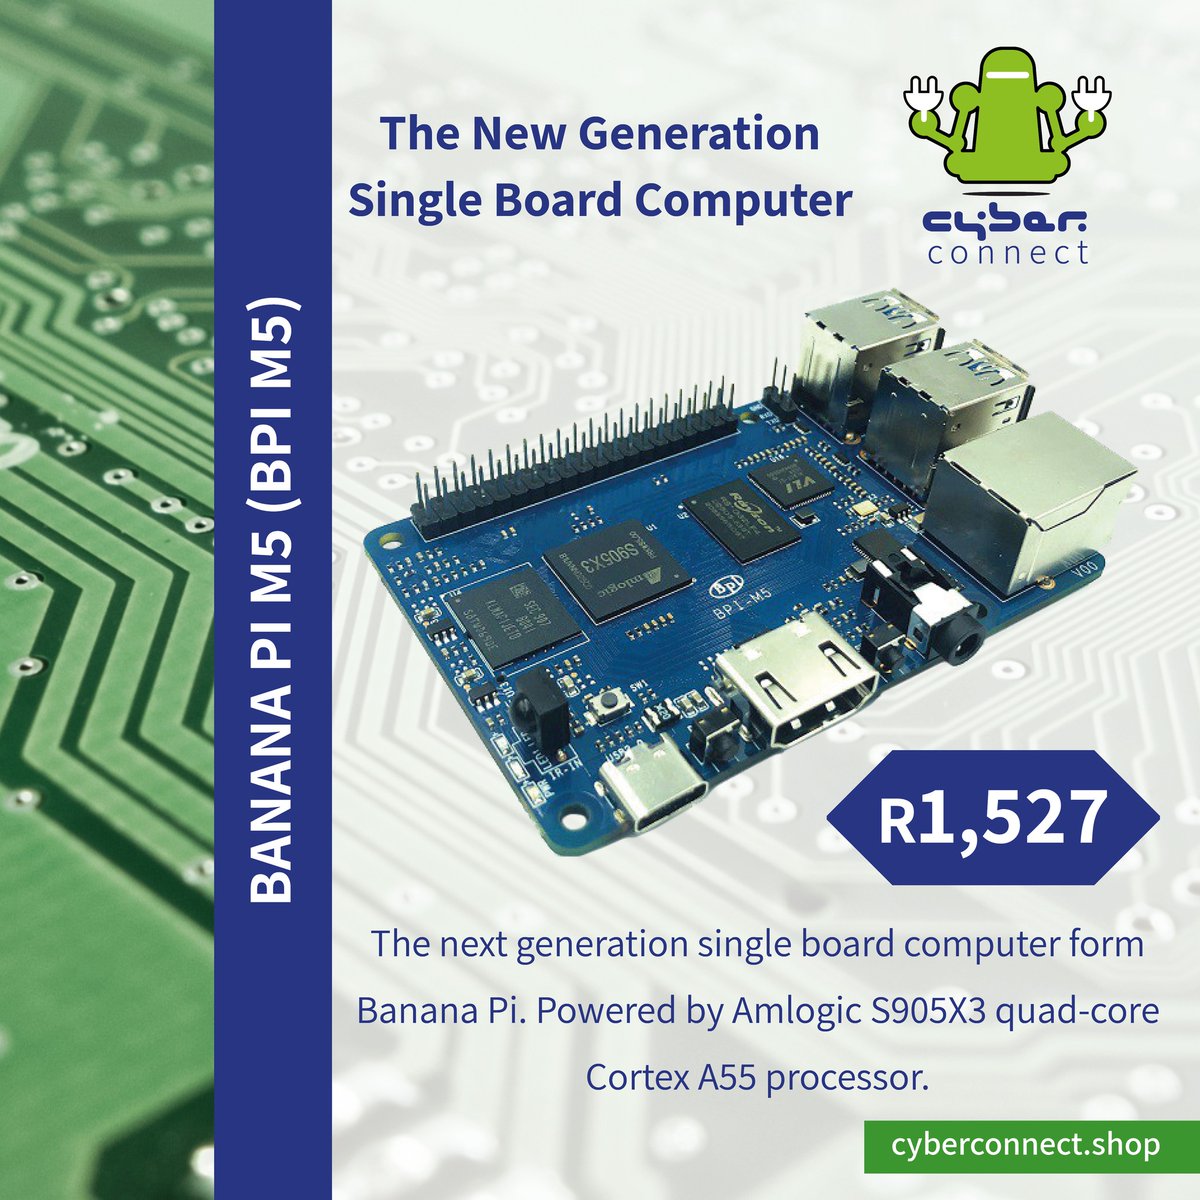 There is just so much of banana pi to discover. Request a Quote or save time and Shop Online. Get in touch ☎011 781 8014 #SingleBoardComputer #DevelopmentBoard #Storage #Network